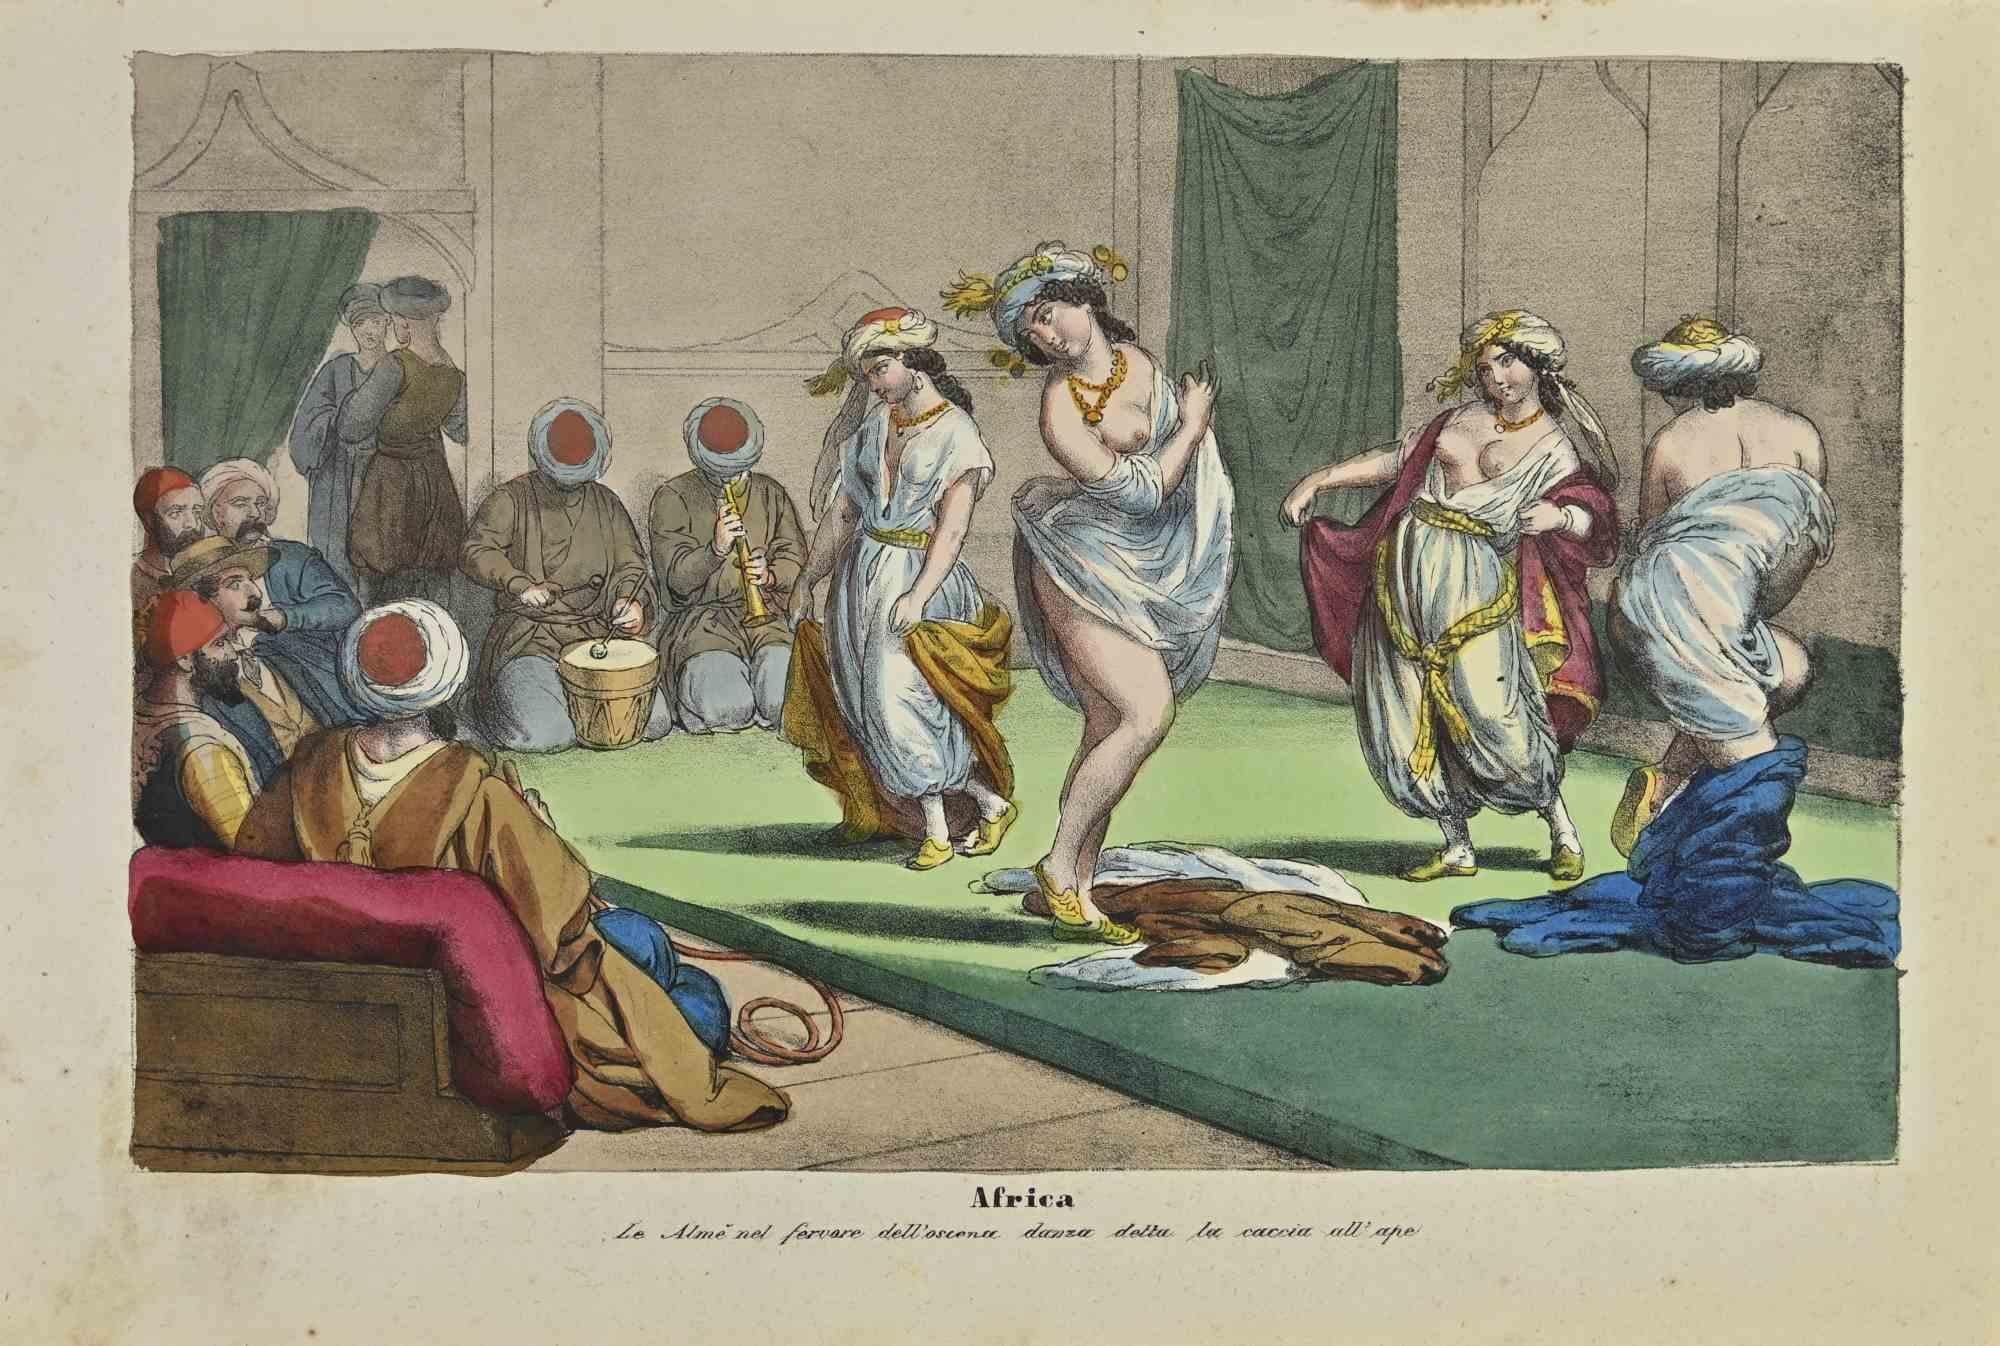 Ancient African Costumes is a lithograph made by Auguste Wahlen in 1844.

Hand colored.

Good condition.

At the center of the artwork is the original title "Africa" and subtitle "Le Almè nel fervore dell'oscena danza detta la caccia all'ape"